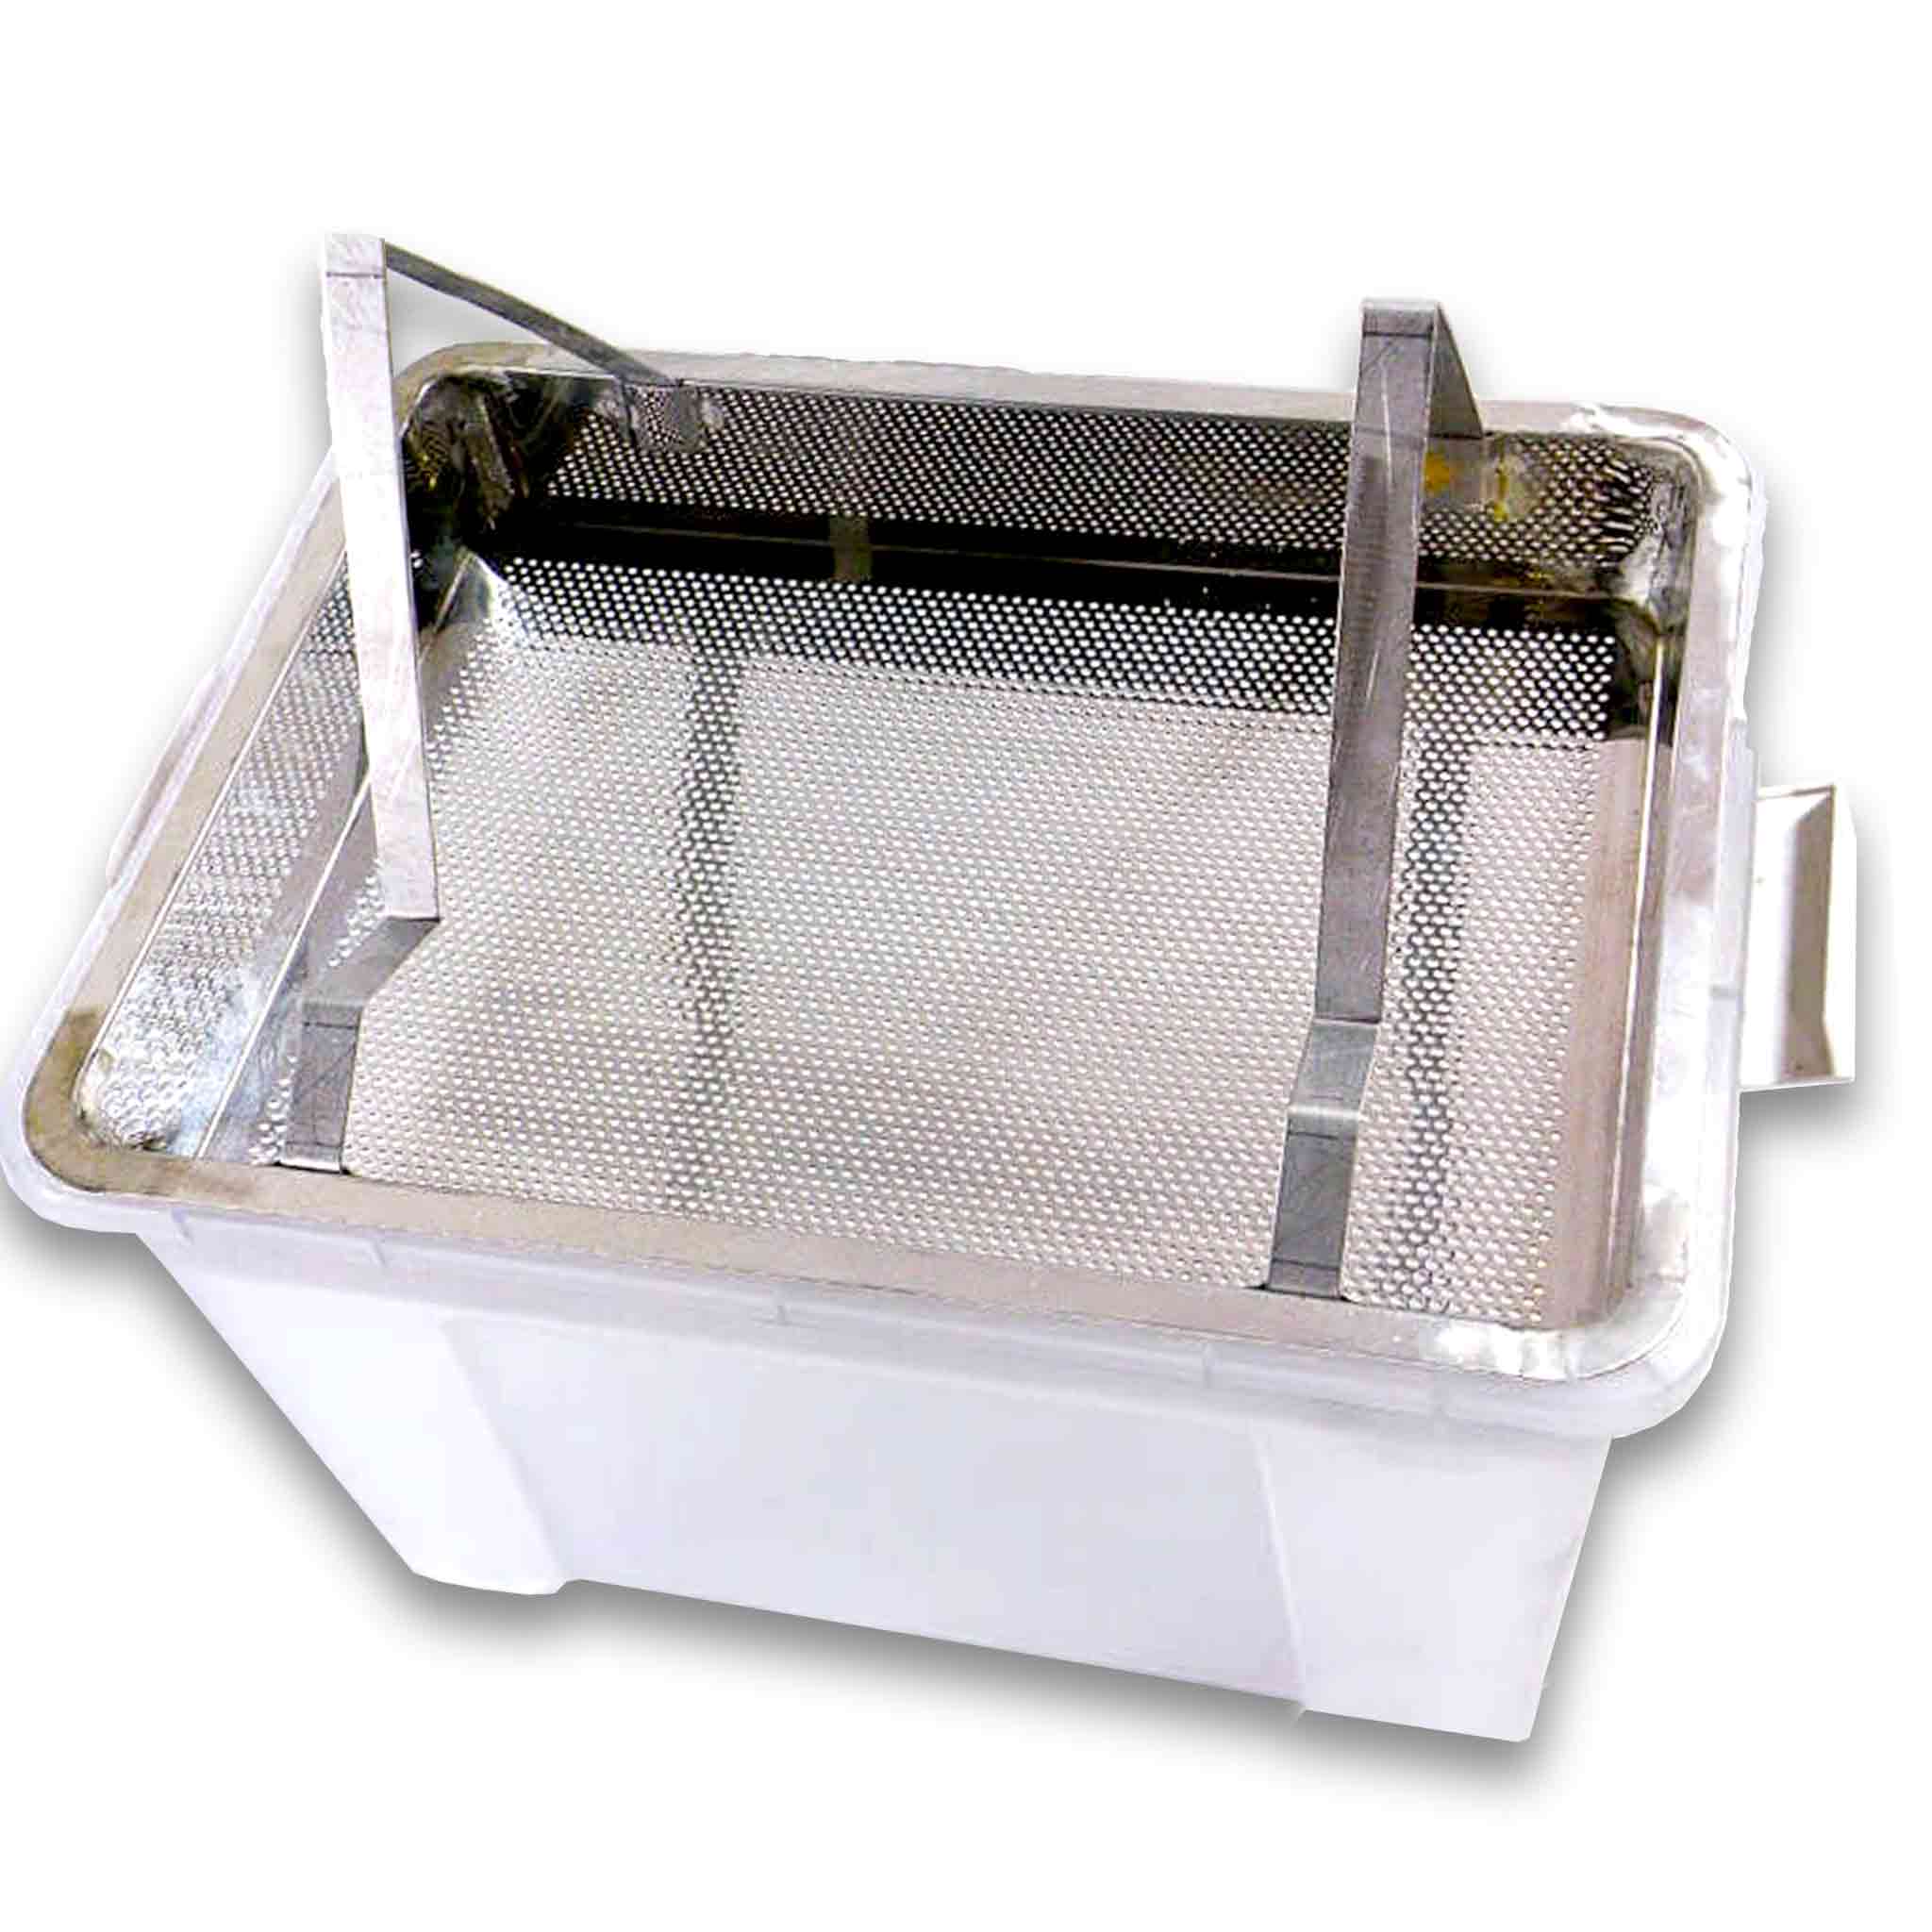 Beekeeping Uncapping Tray for the Removal of Cappings including Drip Tray - Tools collection by Buzzbee Beekeeping Supplies